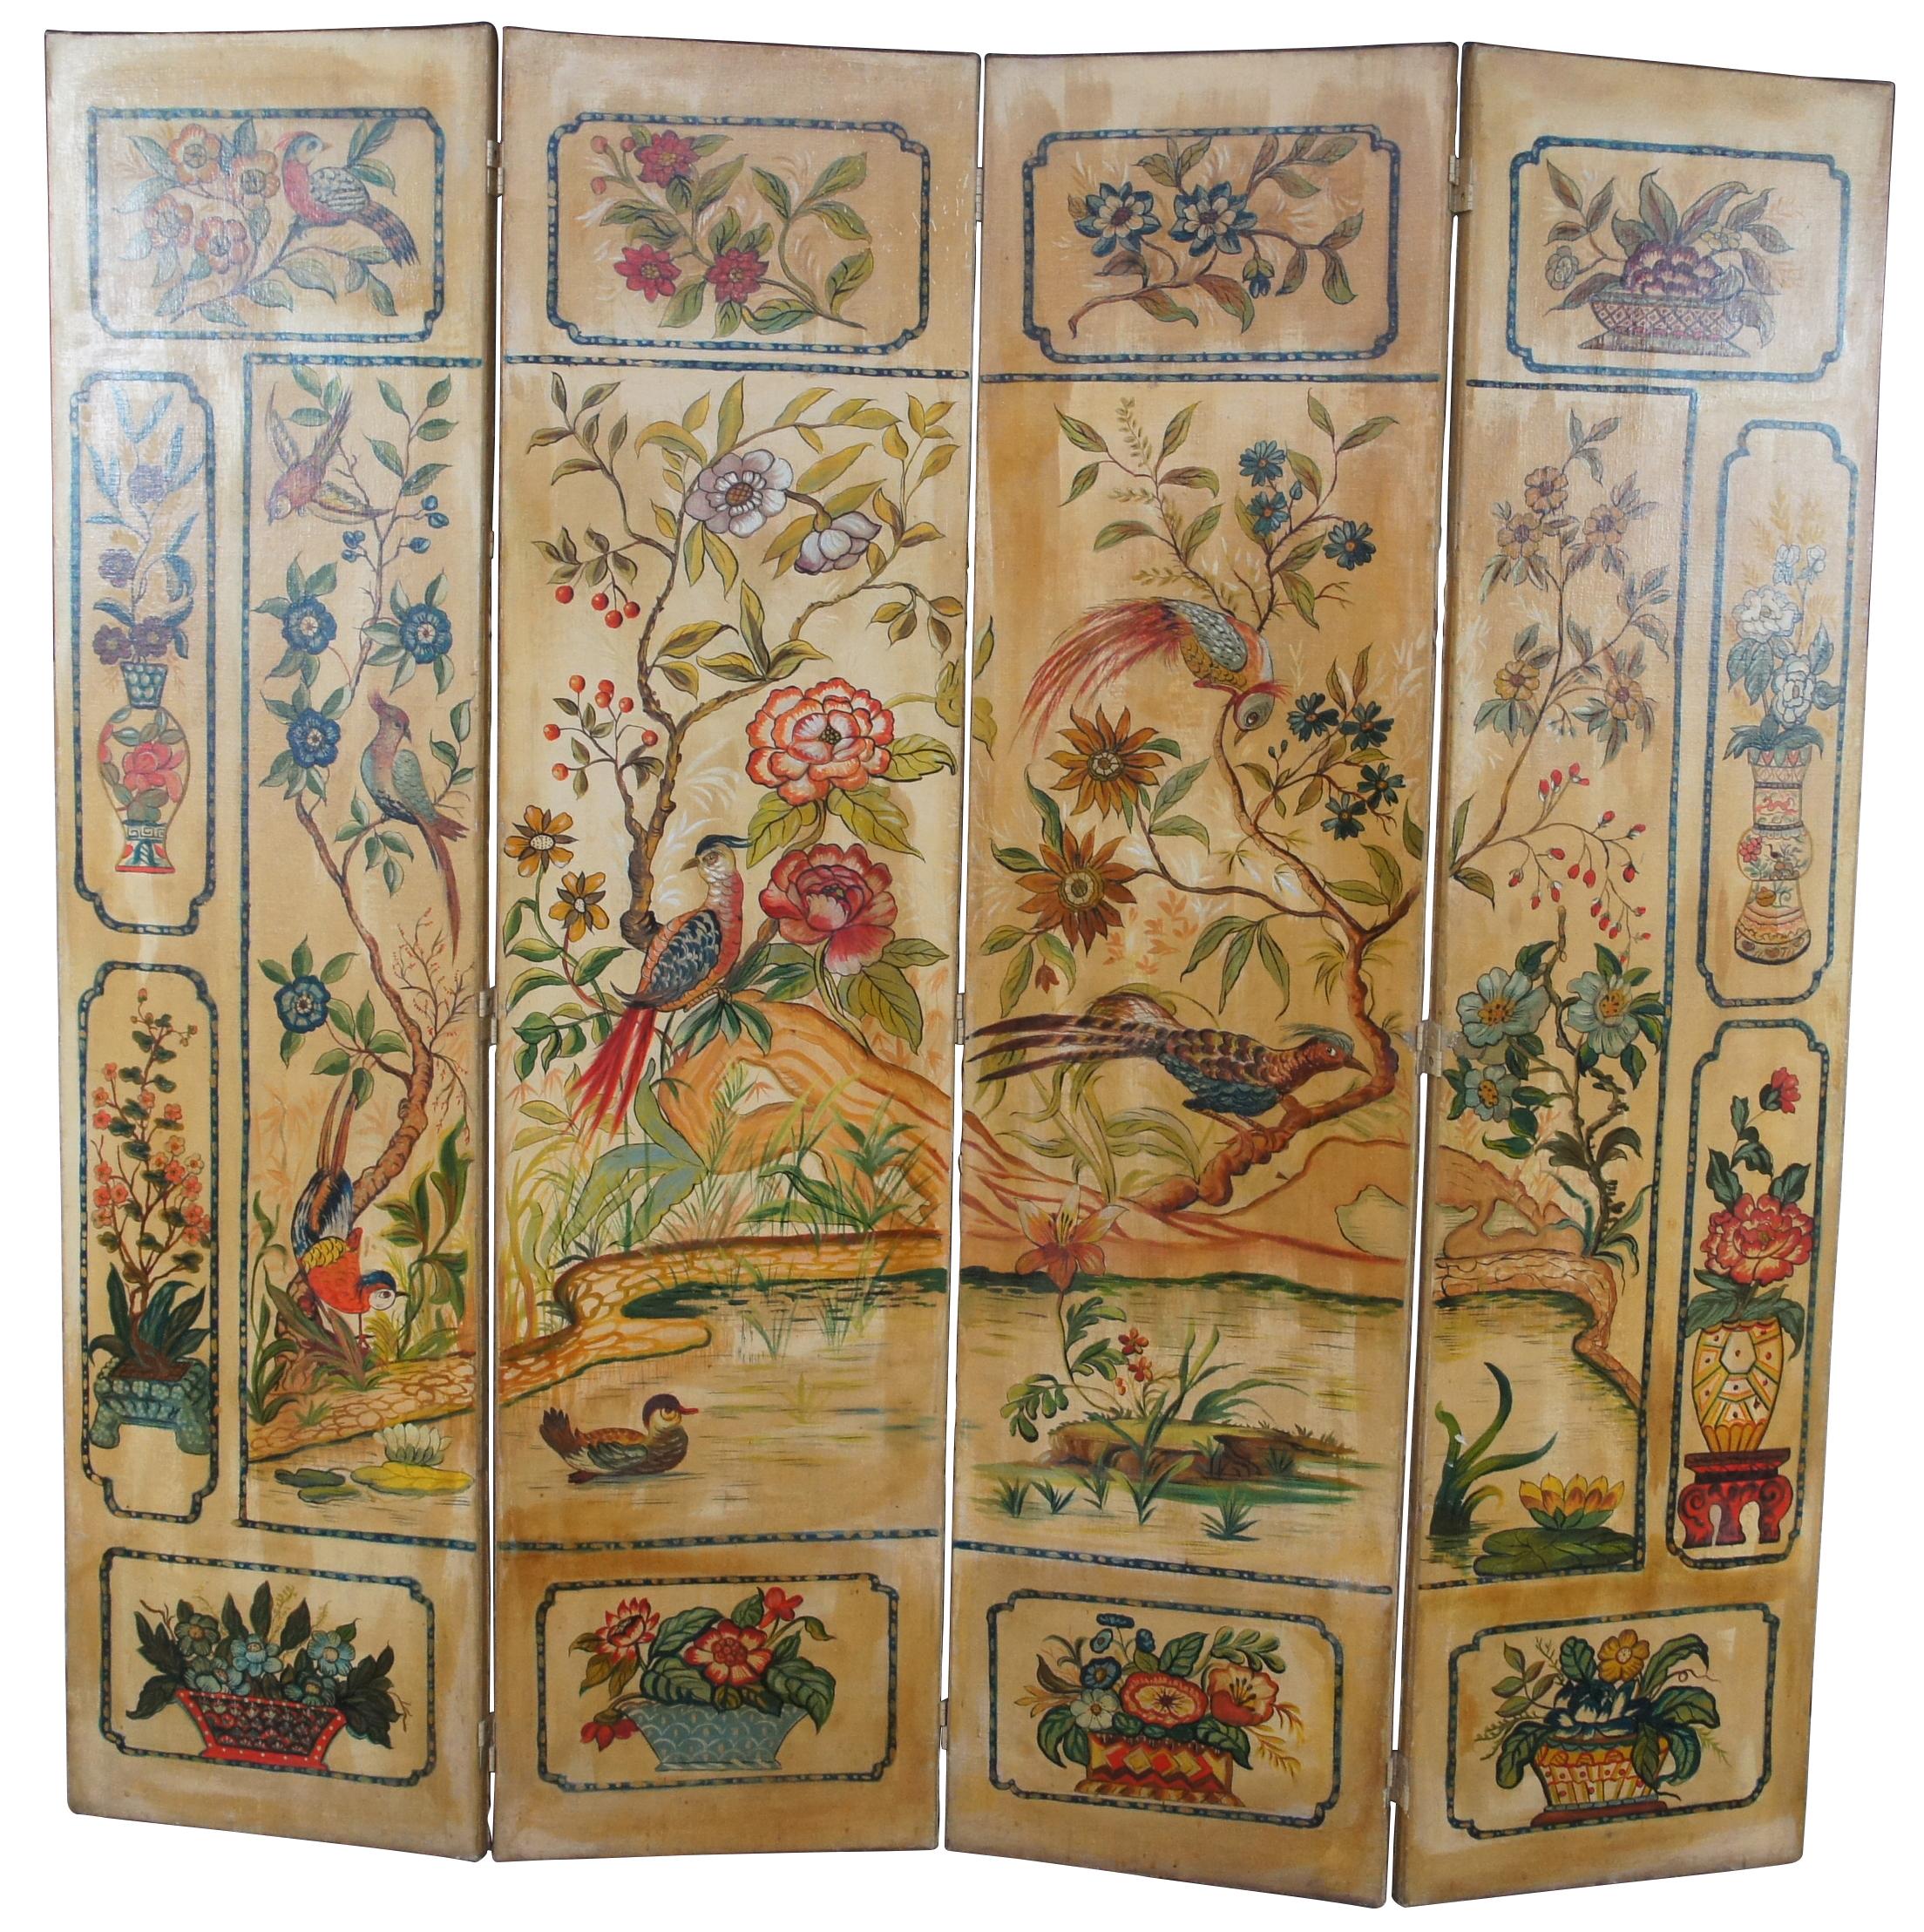 Mid 20th century chinoiserie room divider or dressing screen. Features an intricately detailed ladscape with tropical animals and flowers around a pond. Includes a duck and a variety of birds. The landscape is neatly framed by a boarder of porcelain